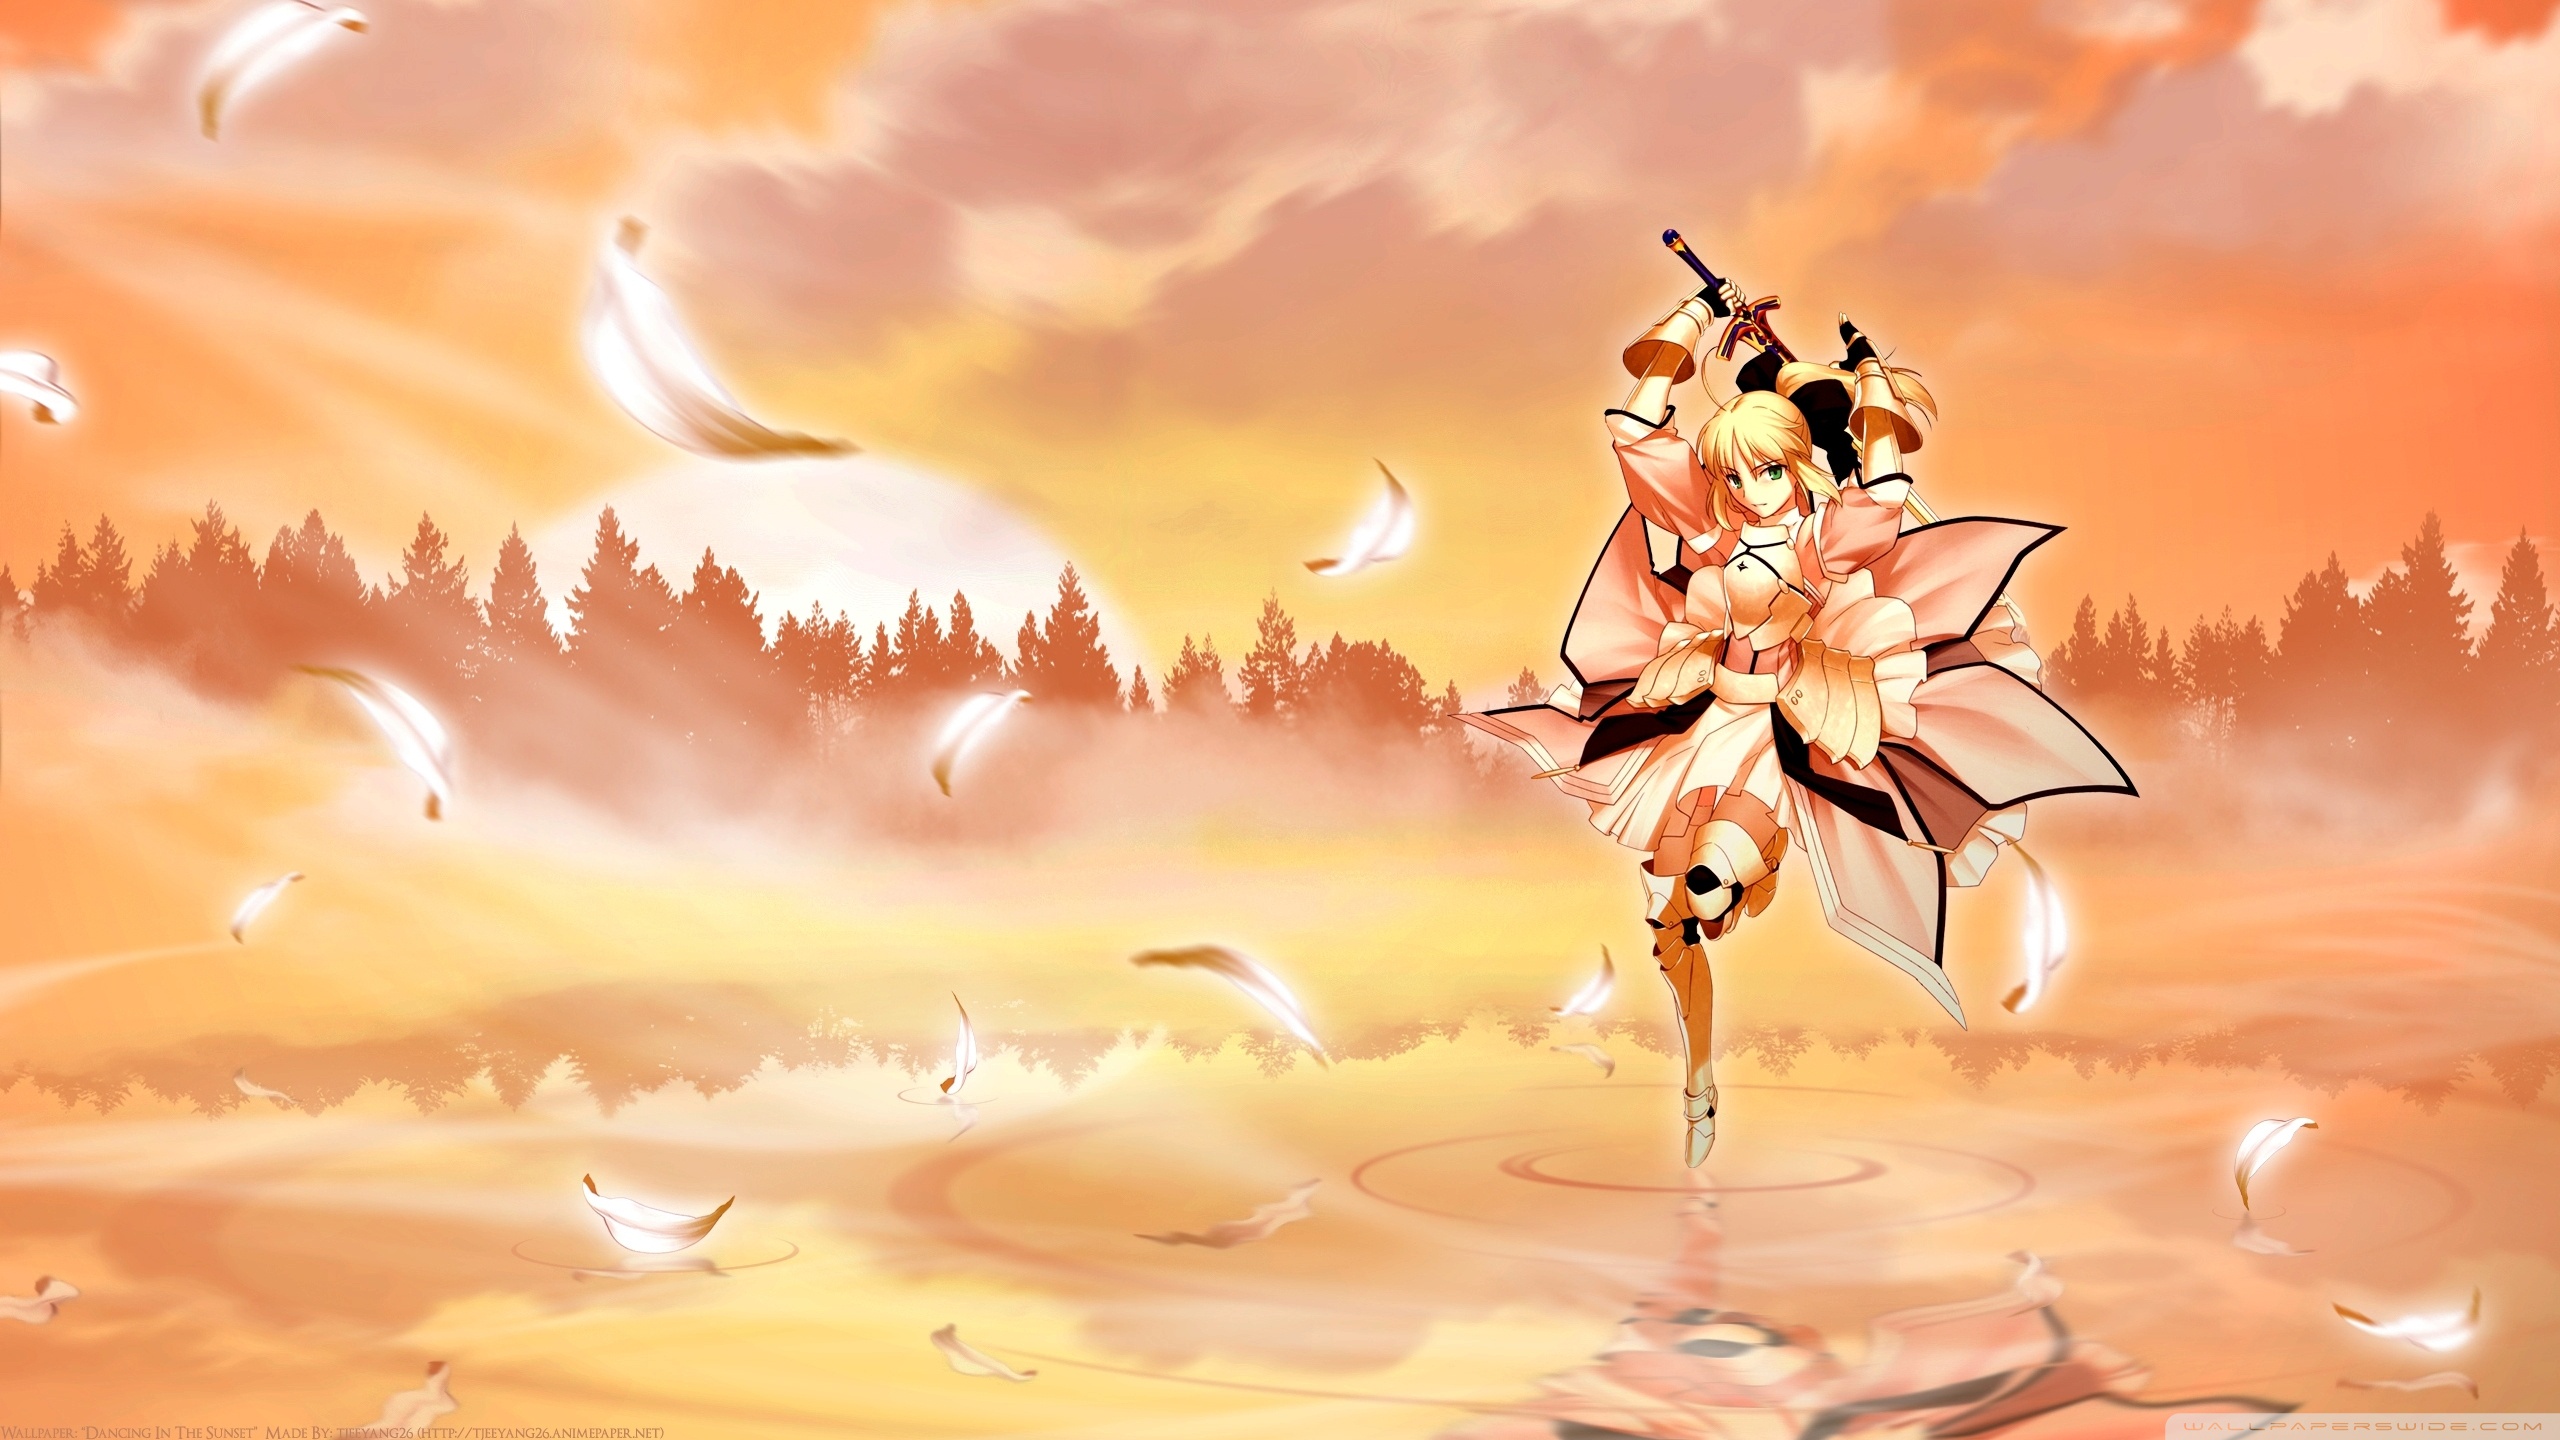 Saber Lily On Water - HD Wallpaper 